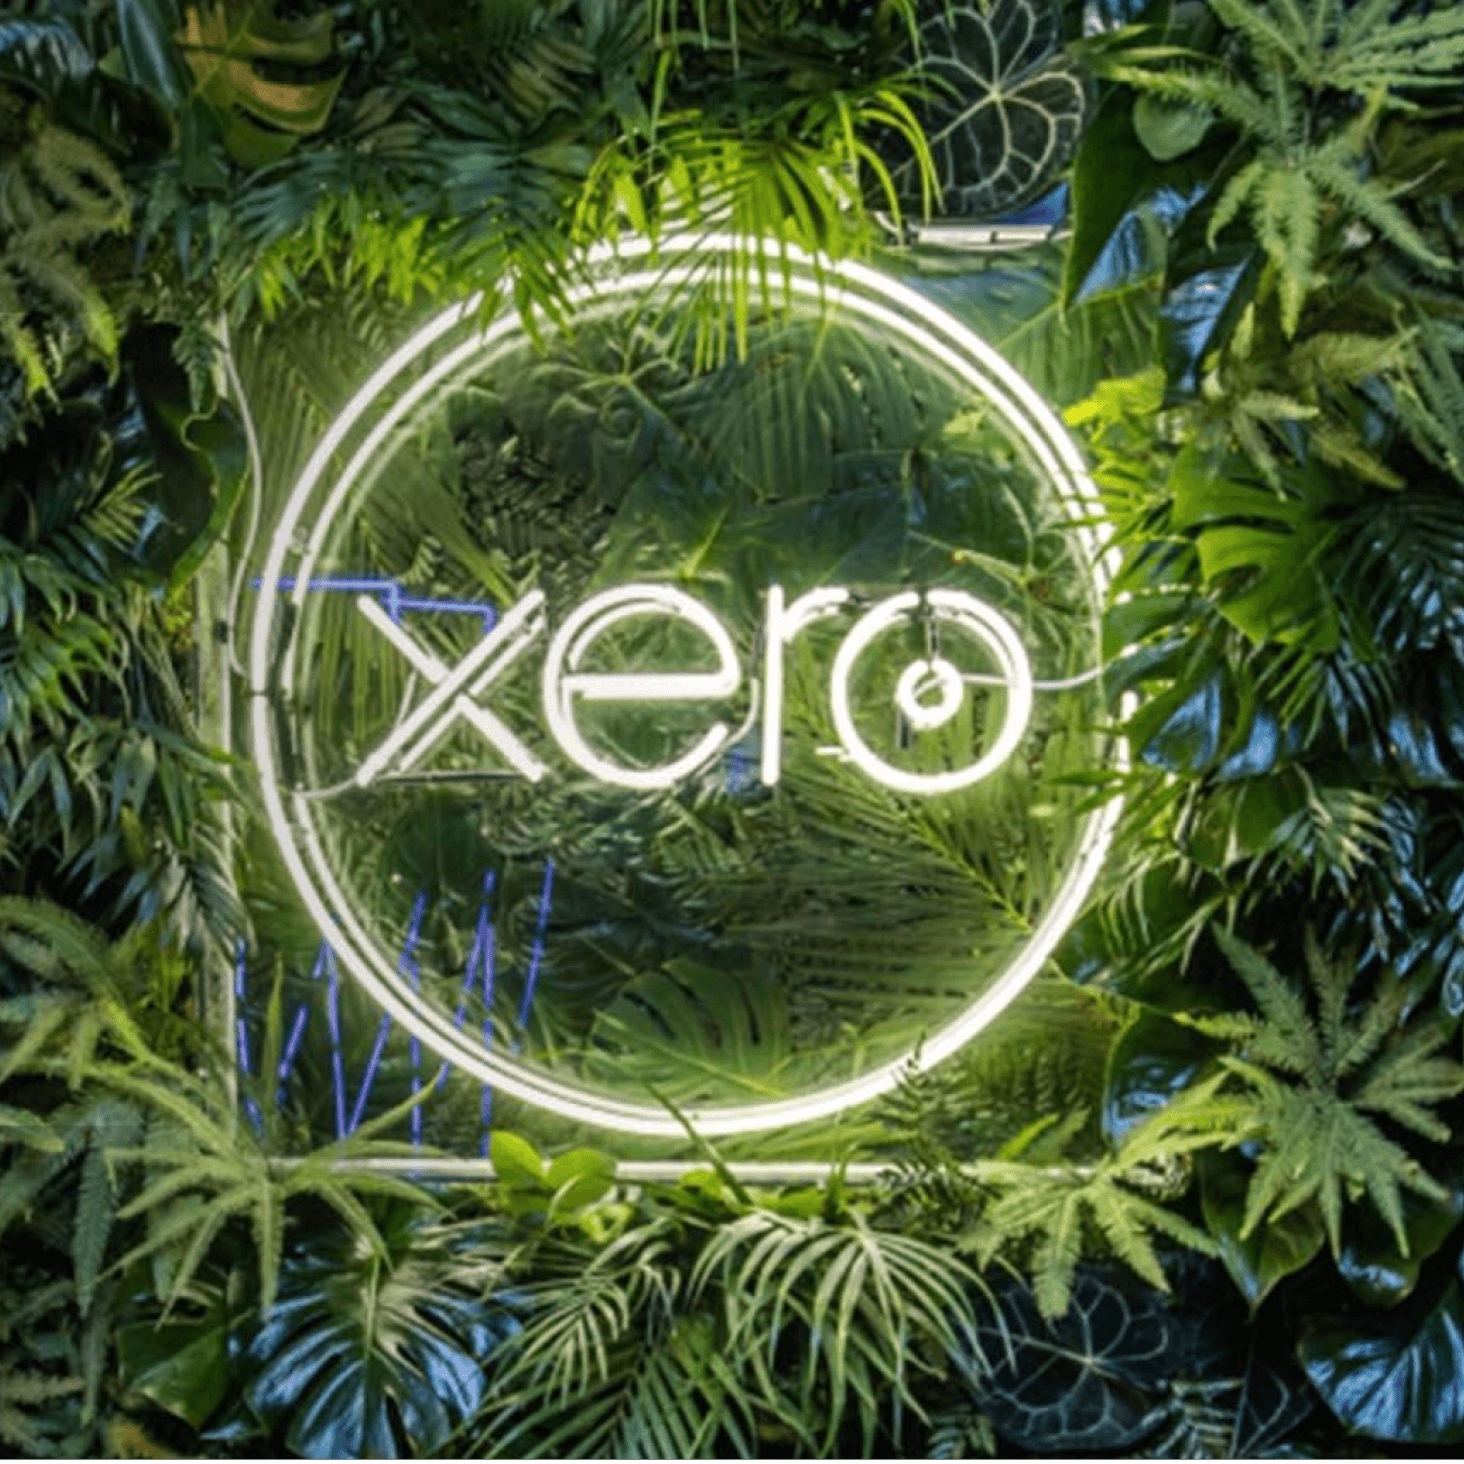 The Xero logo lights up against a background of greenery